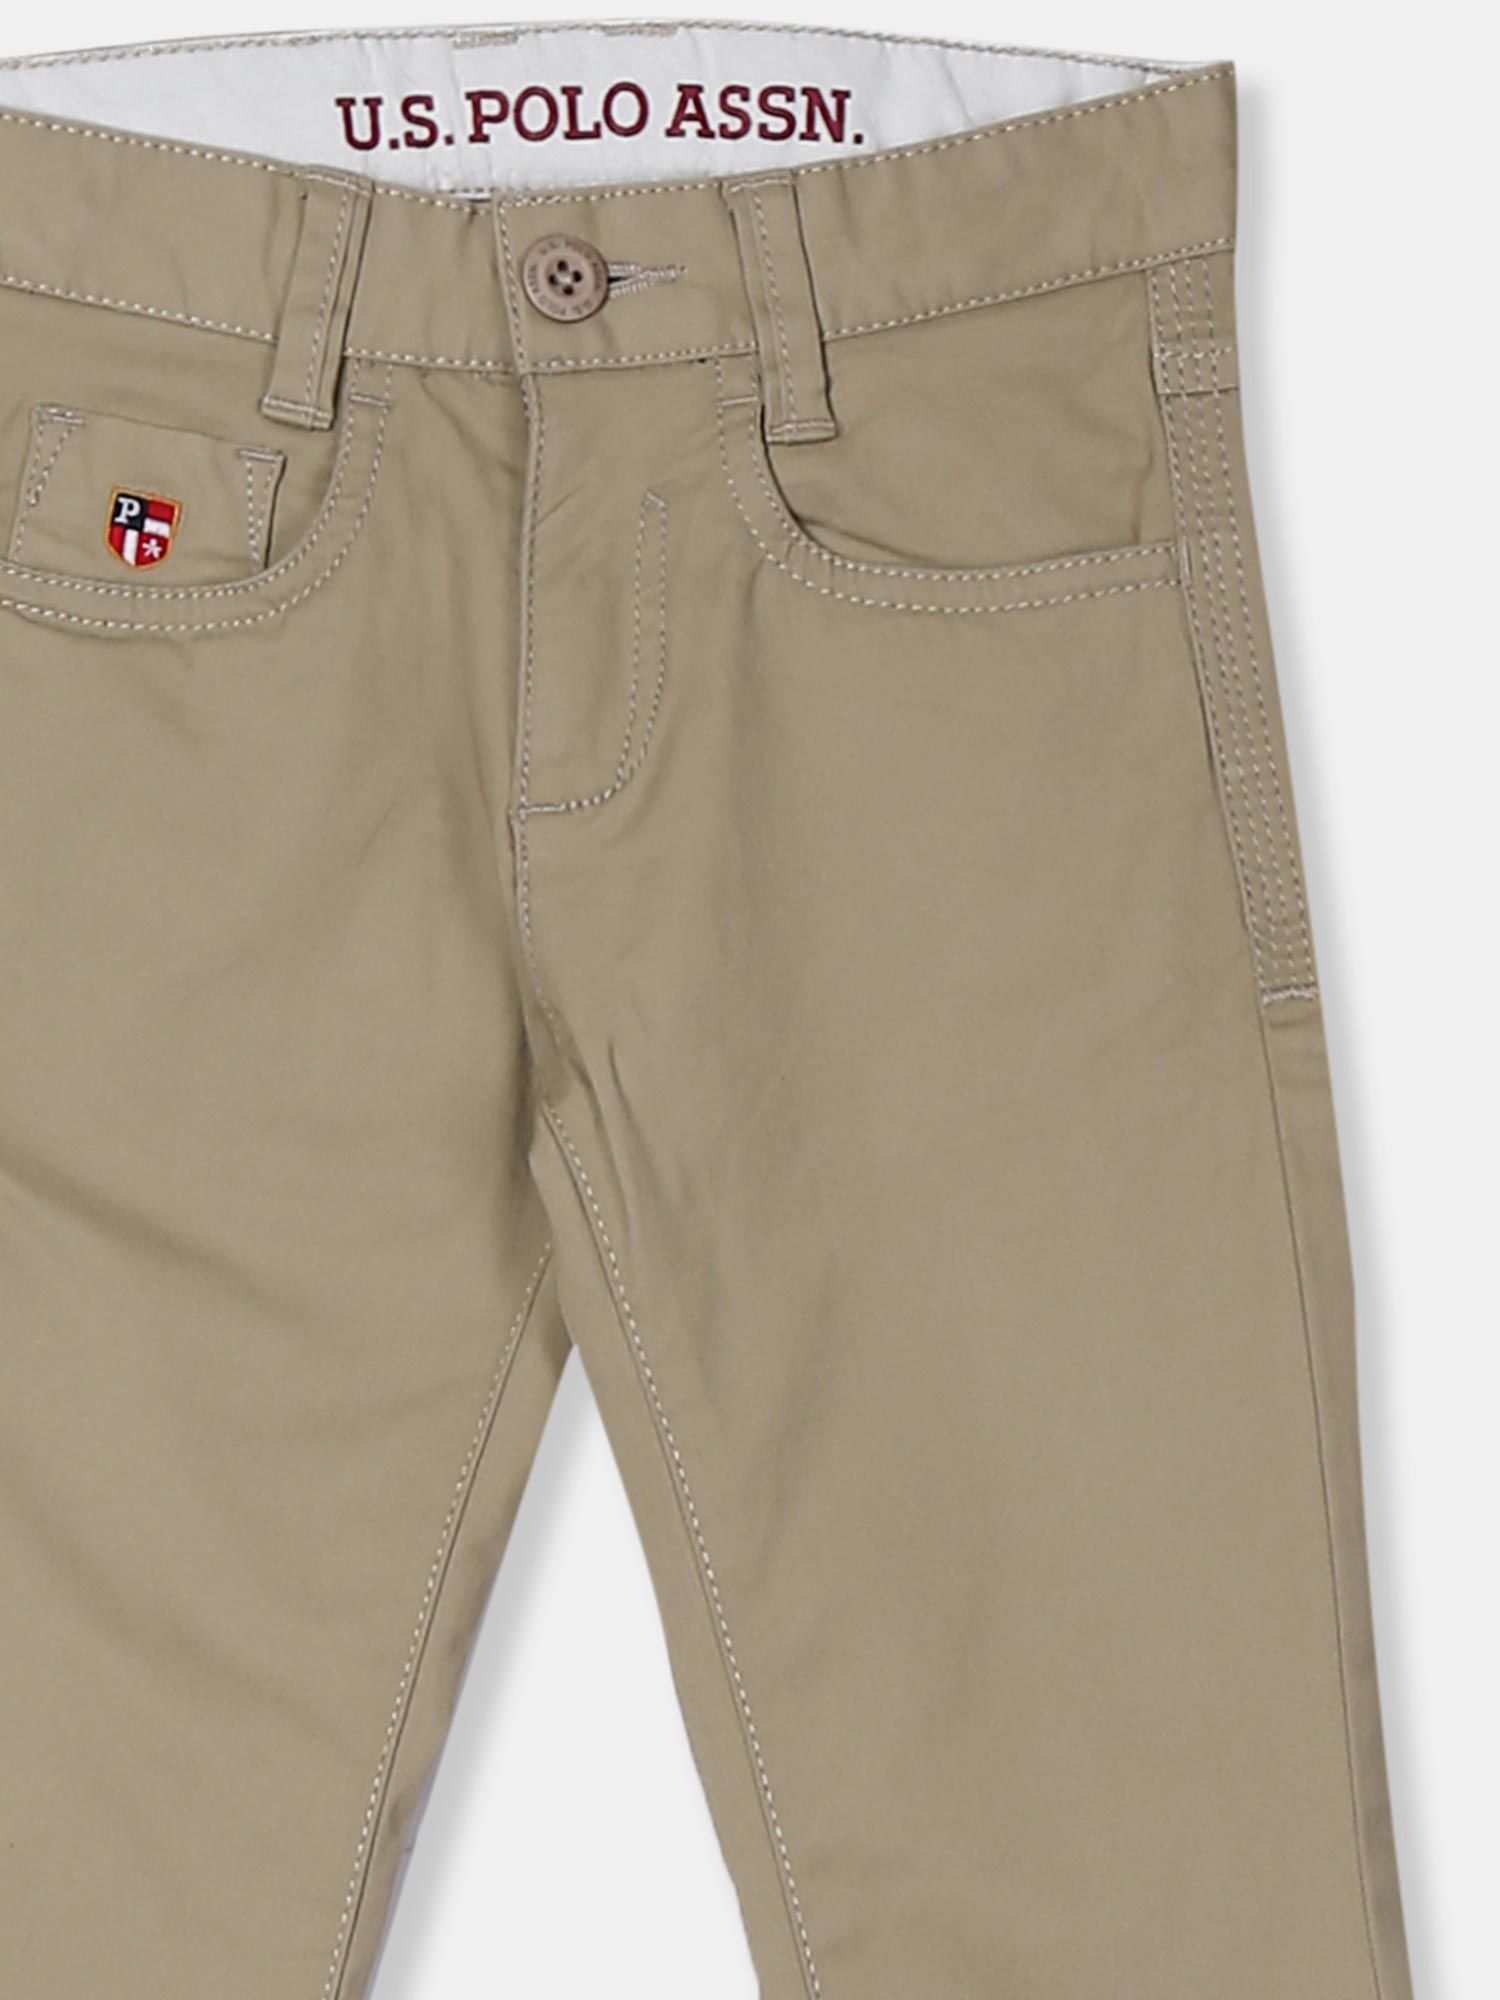 Buy US Polo Assn Olive Green Cotton Regular Fit Trousers for Mens Online   Tata CLiQ